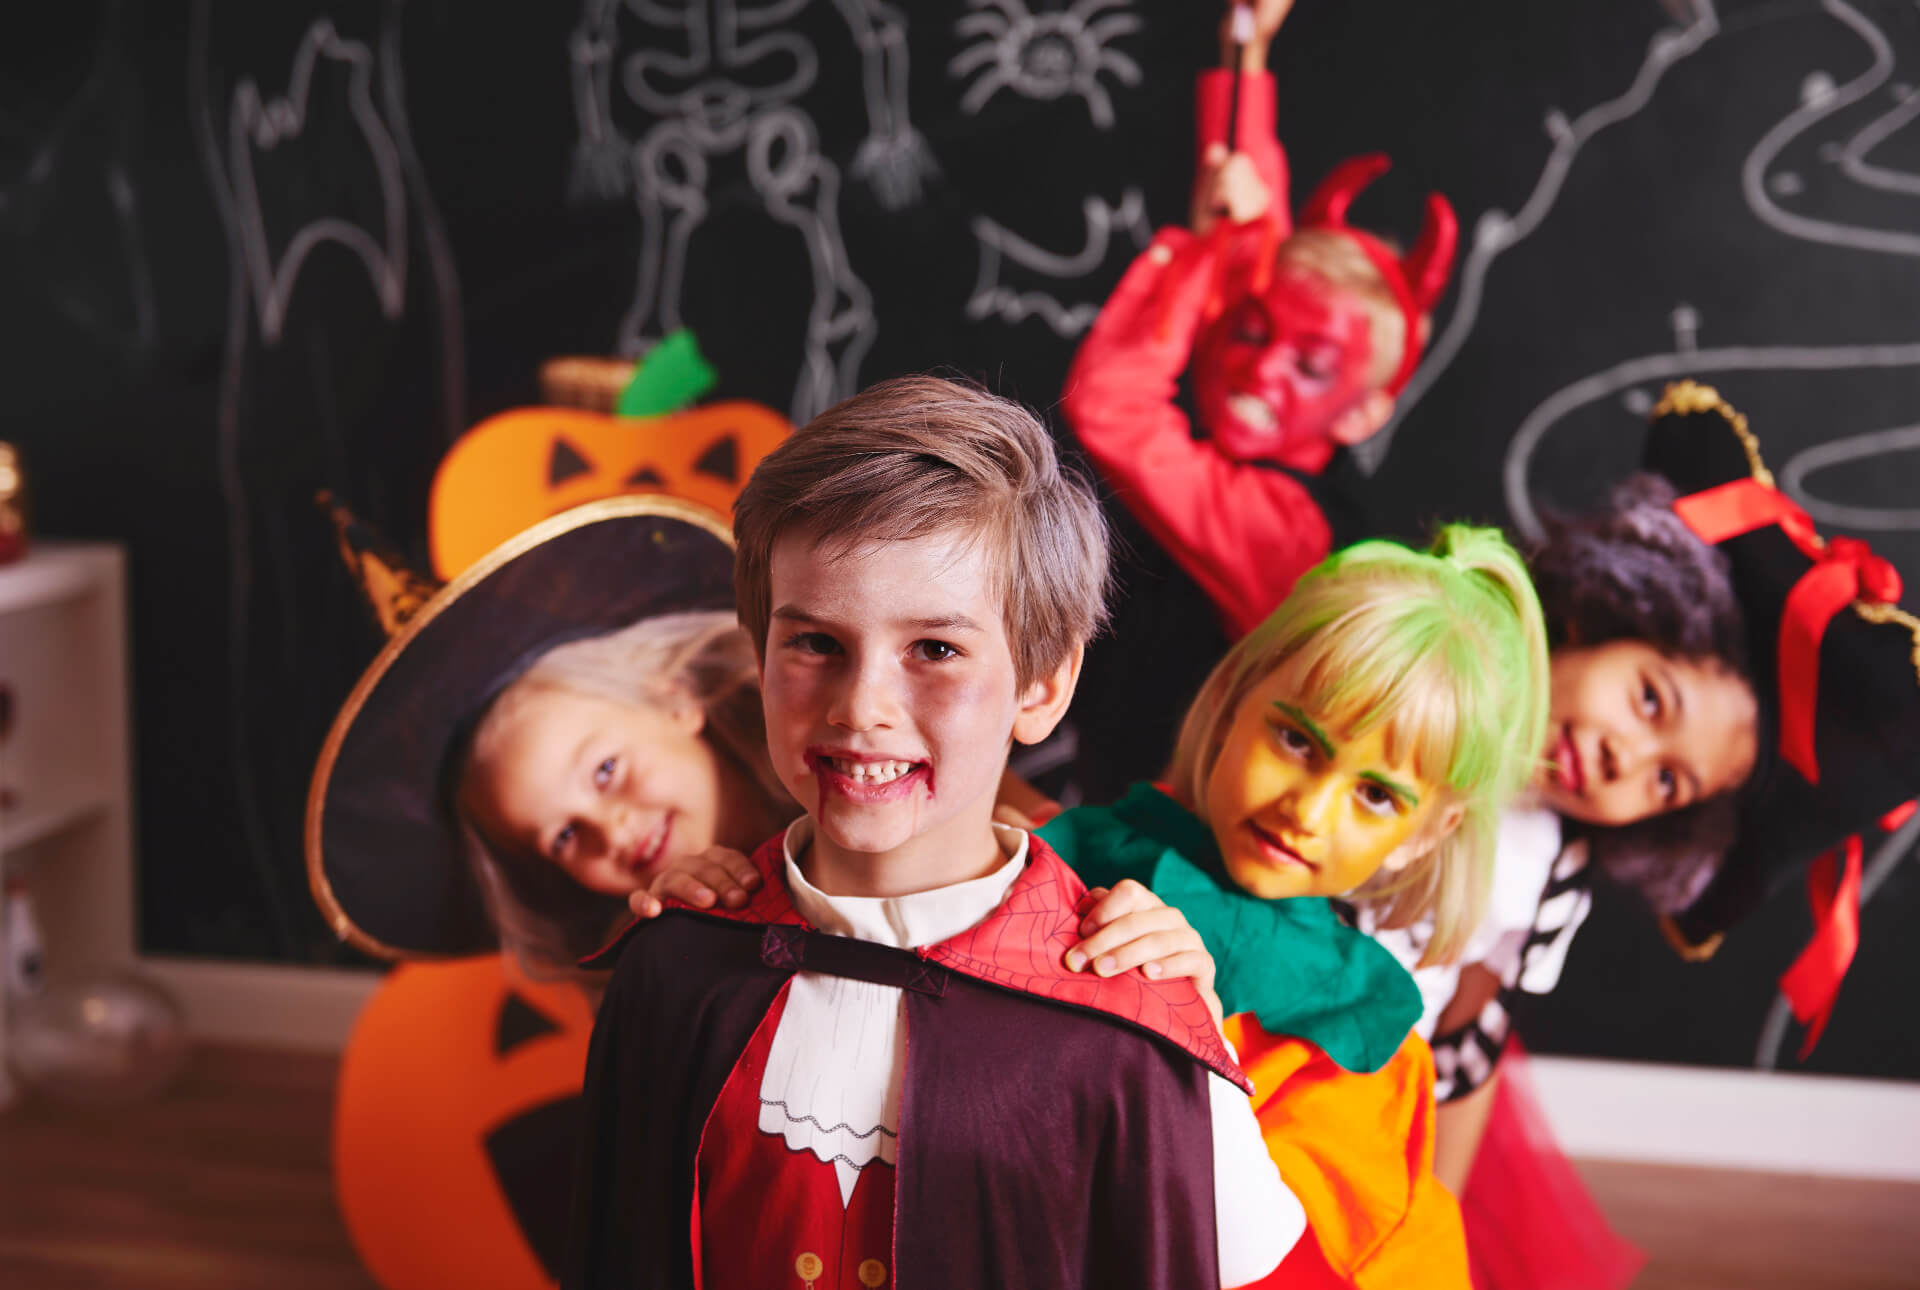 Experience Halloween in Graz: Visit "NoWayout," the exciting quest room for children, and explore the "School of Magic."